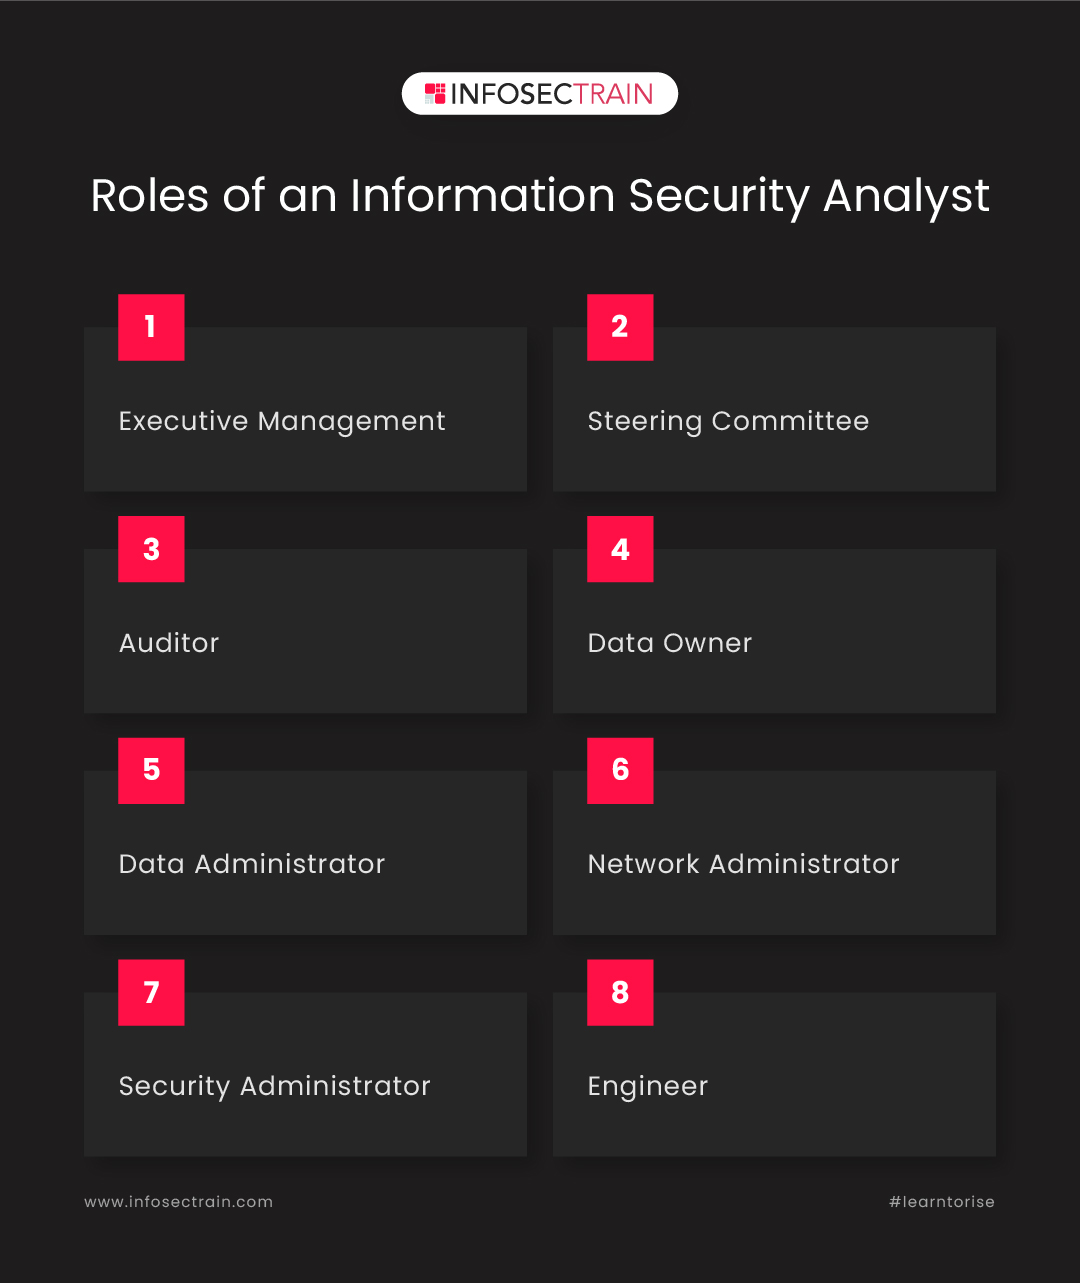 Roles of an Information Security Analyst